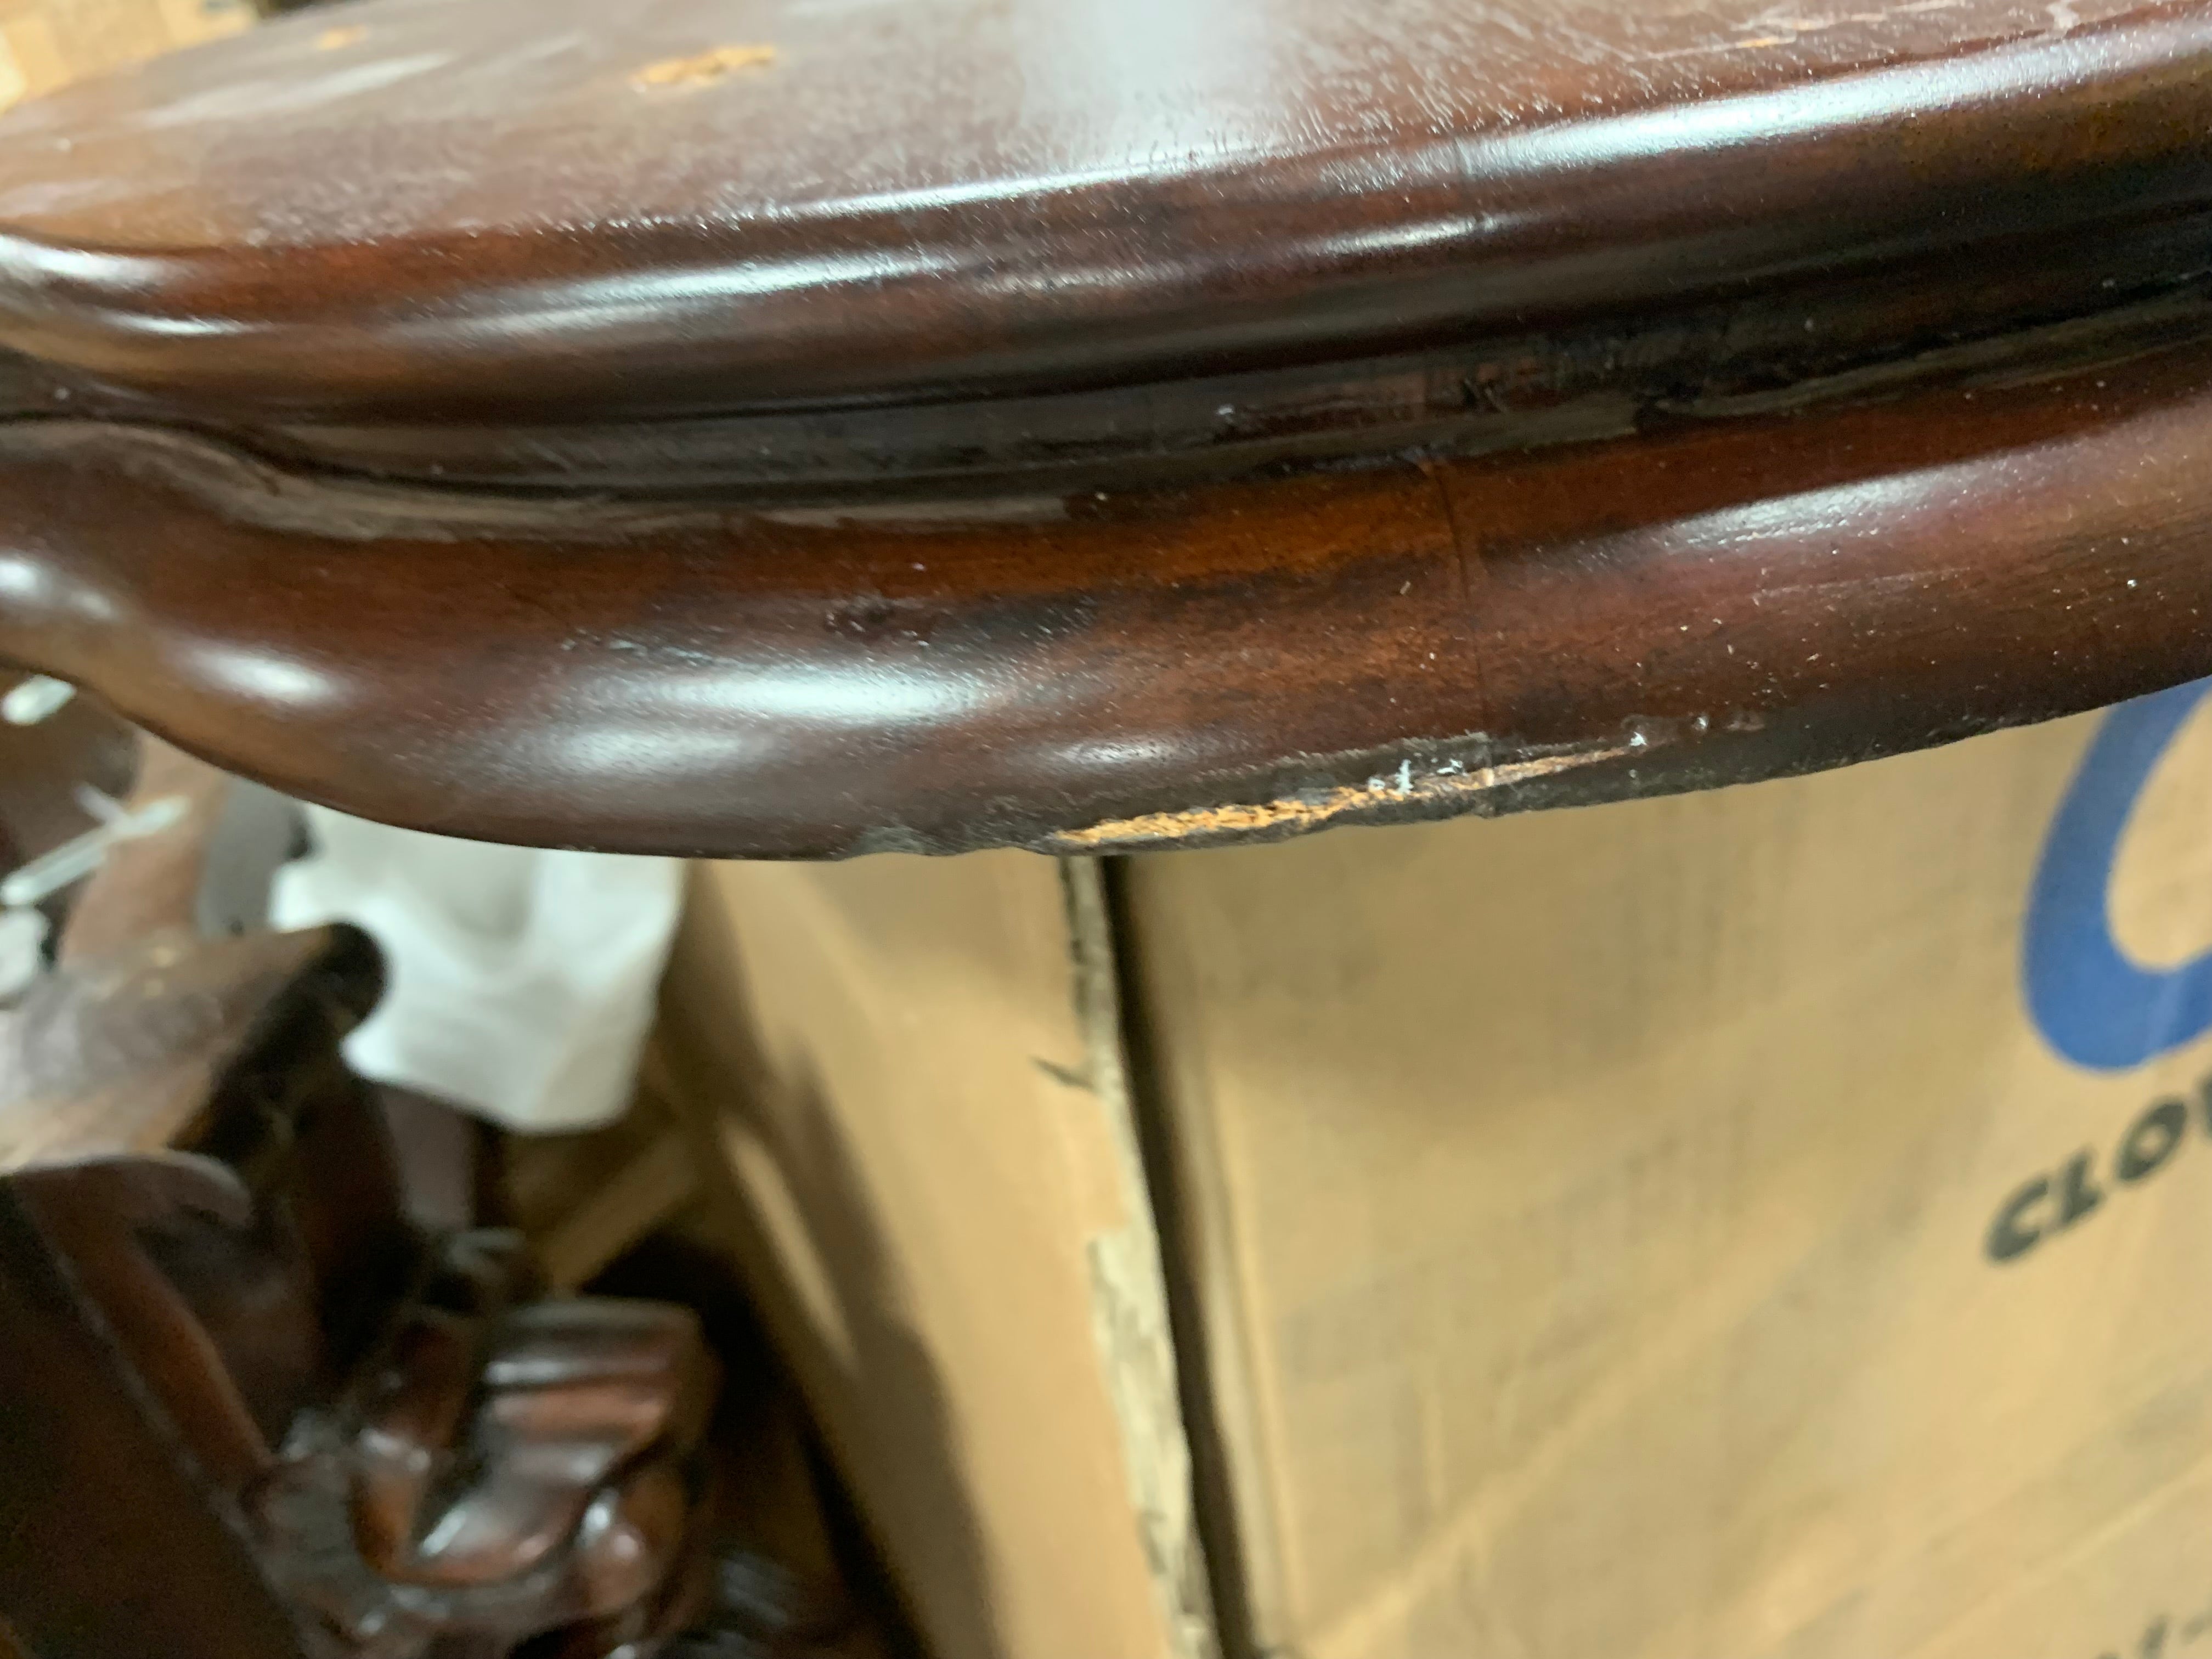 30.5'' Tall Solid Wood Tray Top End Table